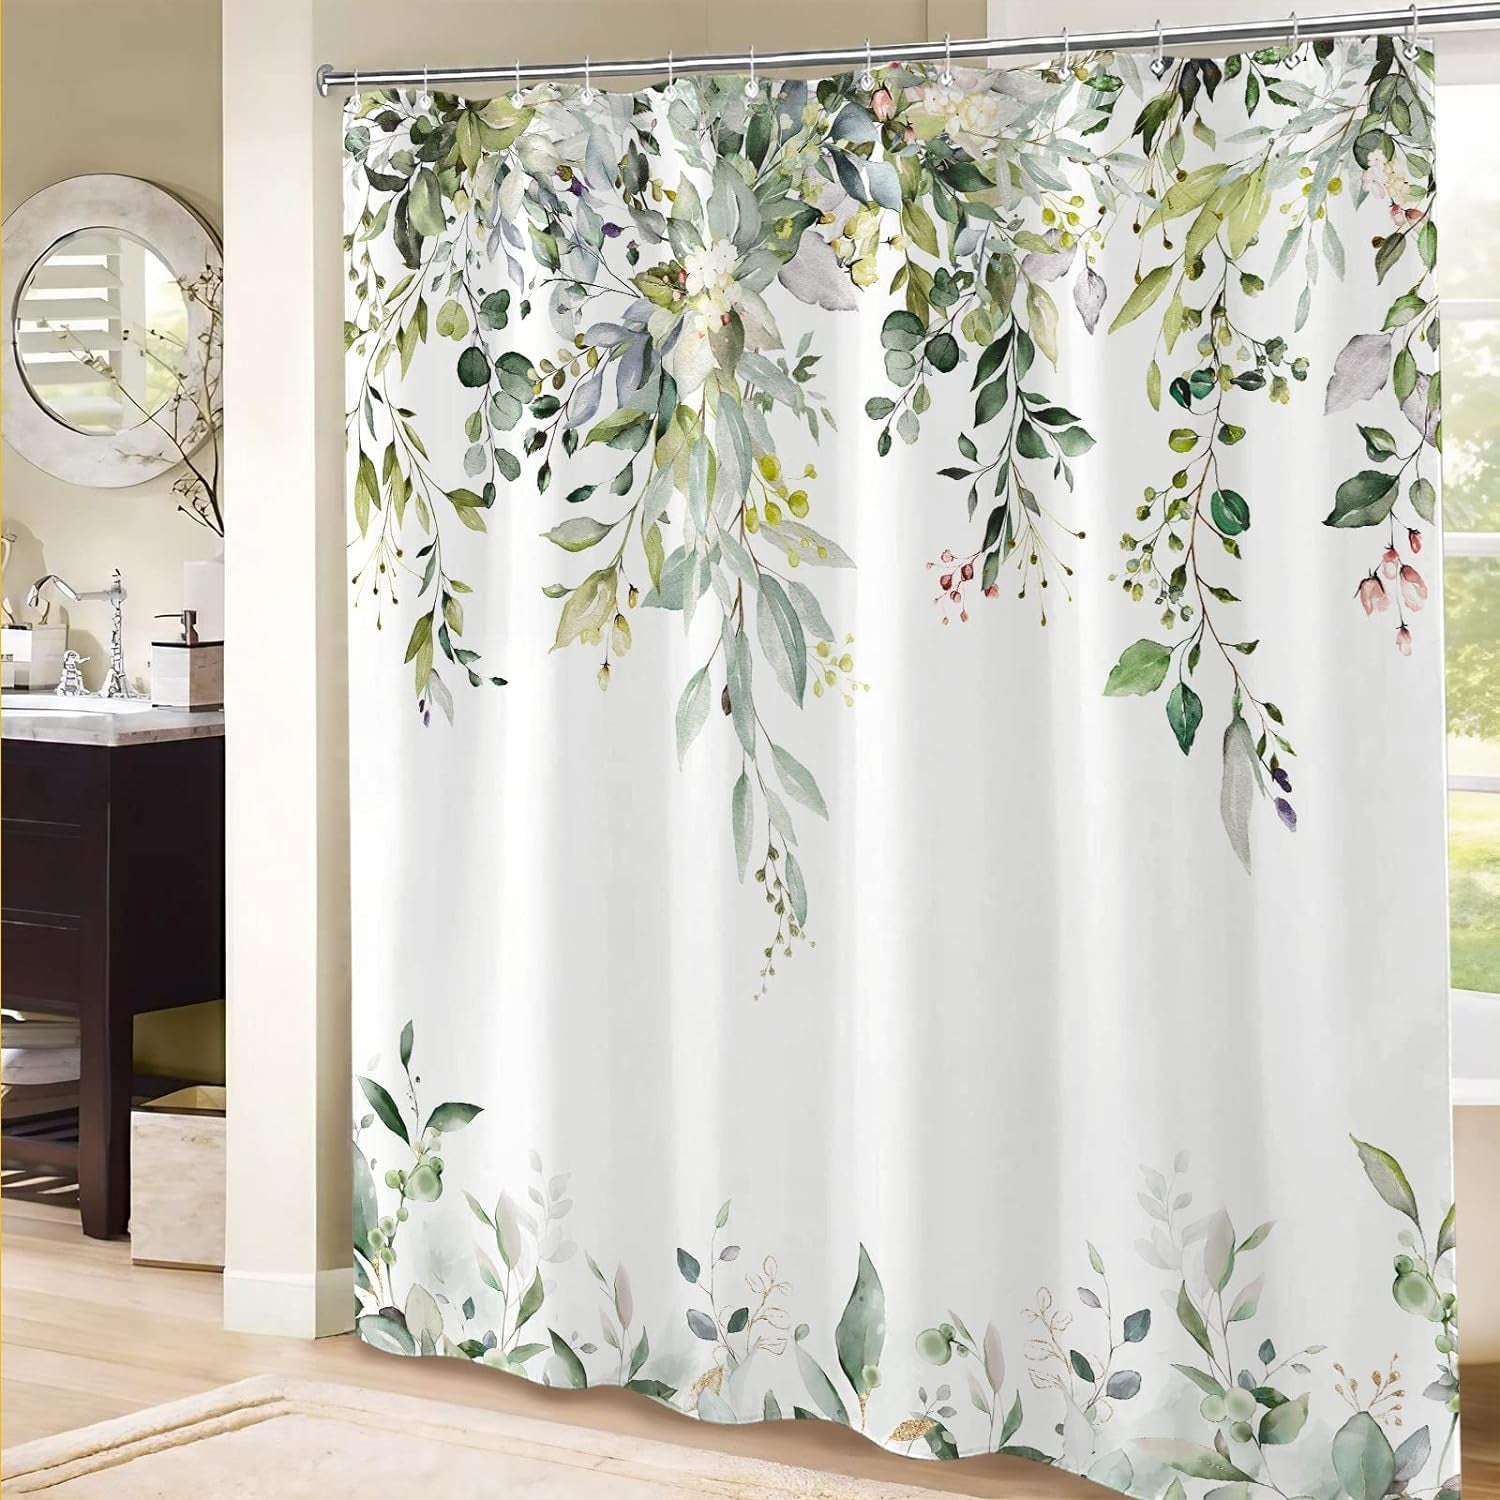 Eucalyptus Plant Rustic Shower Curtain, Watercolor Leaves on the Top Country Farm House Shower Curtain, Spring Botanical Bathroom Curtain 72 ×72 Inch